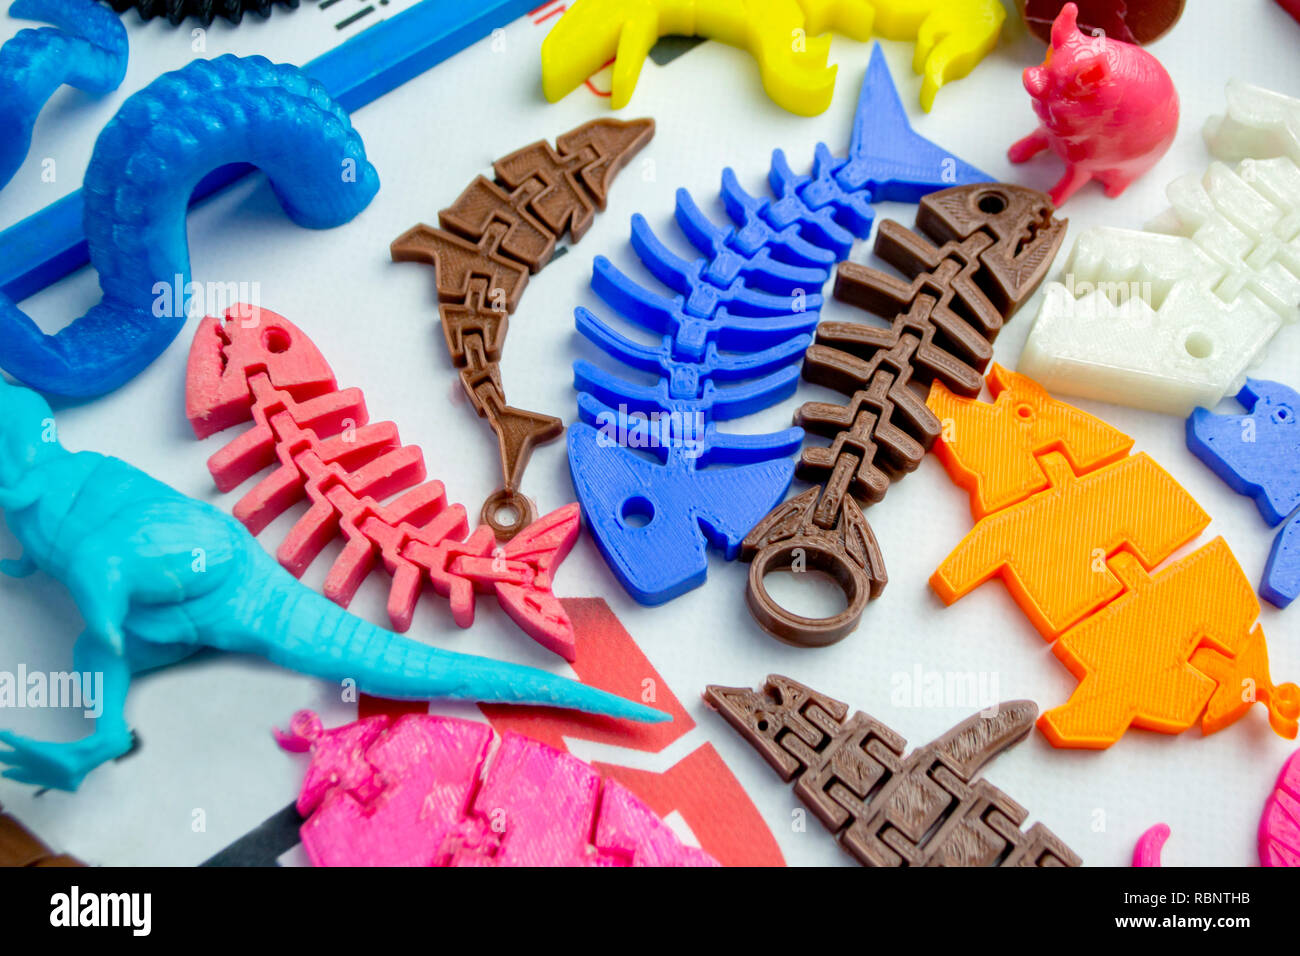 Models printed by 3d printer. Bright colorful objects printed on a 3d  printer on a table close-up. Fused deposition modeling, FDM. Concept modern  progressive additive technology for 3d printing Stock Photo -